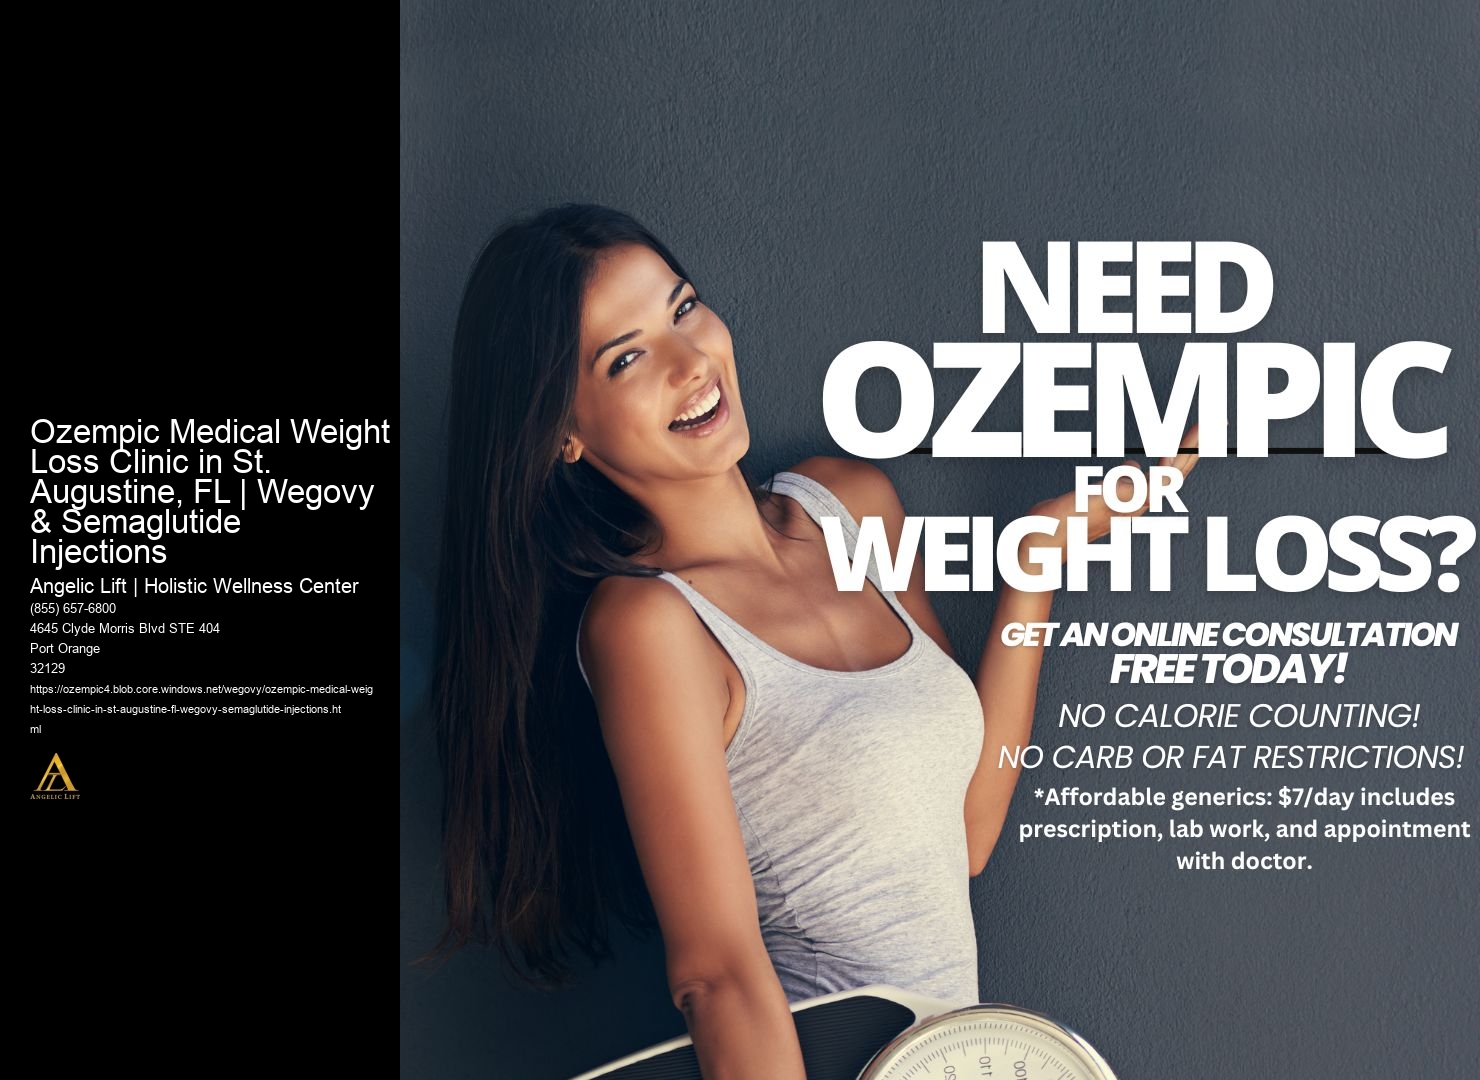 Ozempic Medical Weight Loss Clinic in St. Augustine, FL | Wegovy & Semaglutide Injections